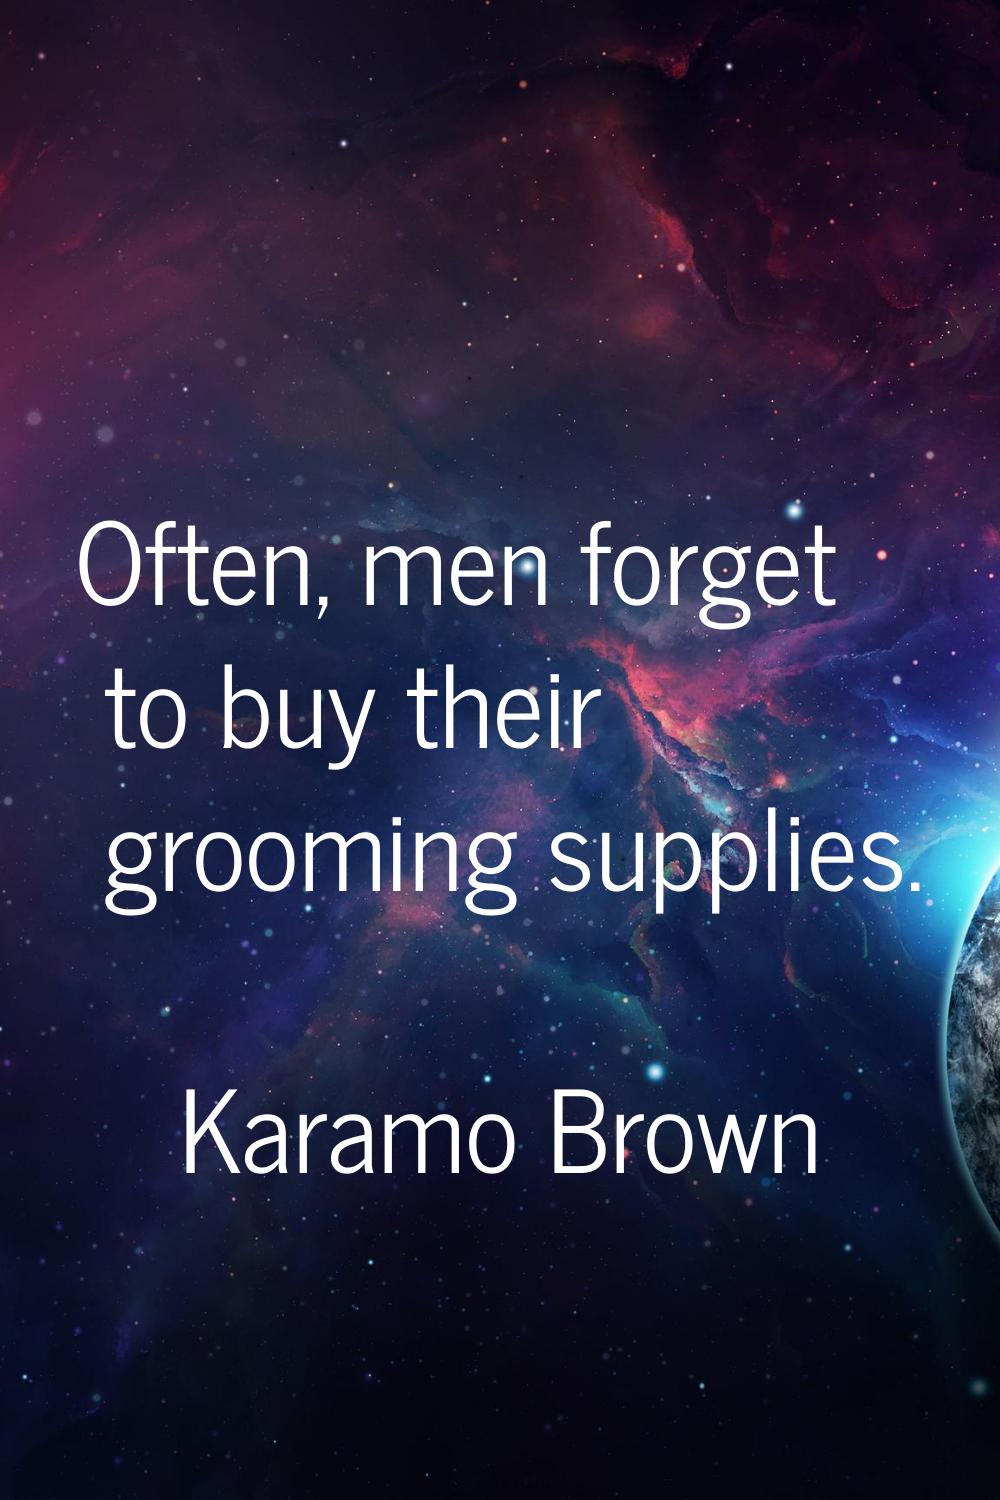 Often, men forget to buy their grooming supplies.